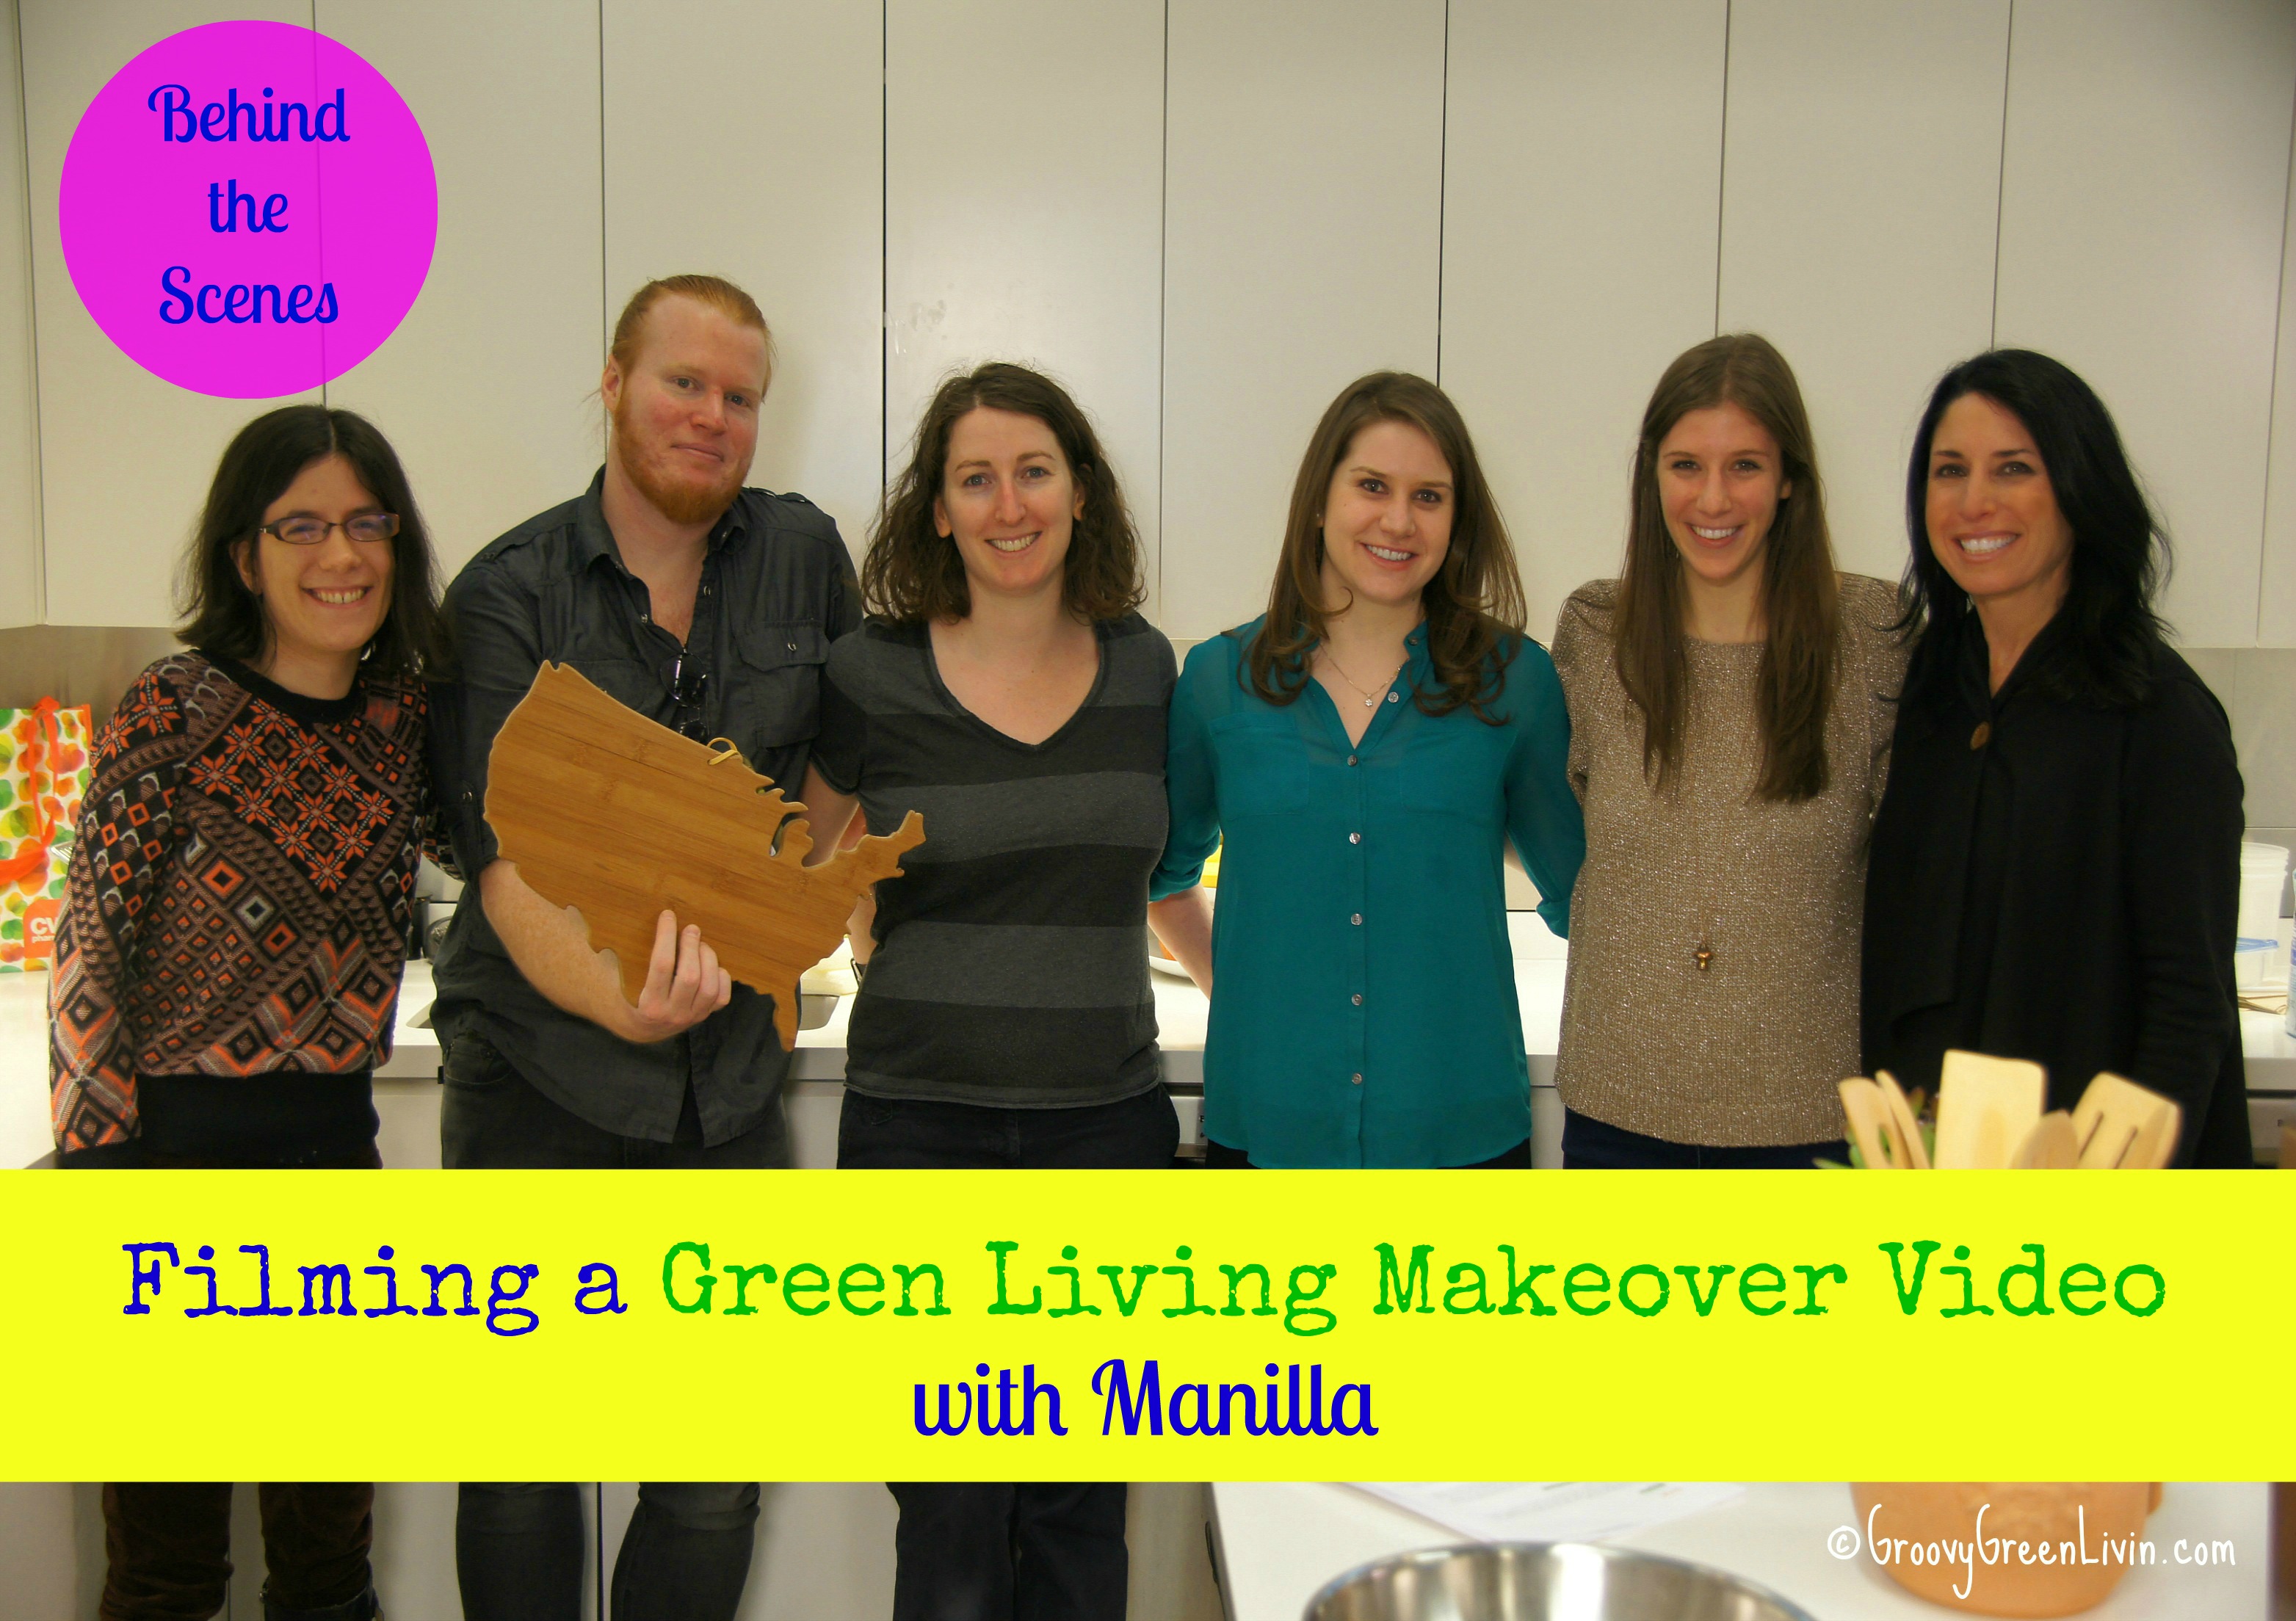 Behind the Scenes: Filming a Green Living Makeover Video with Manilla